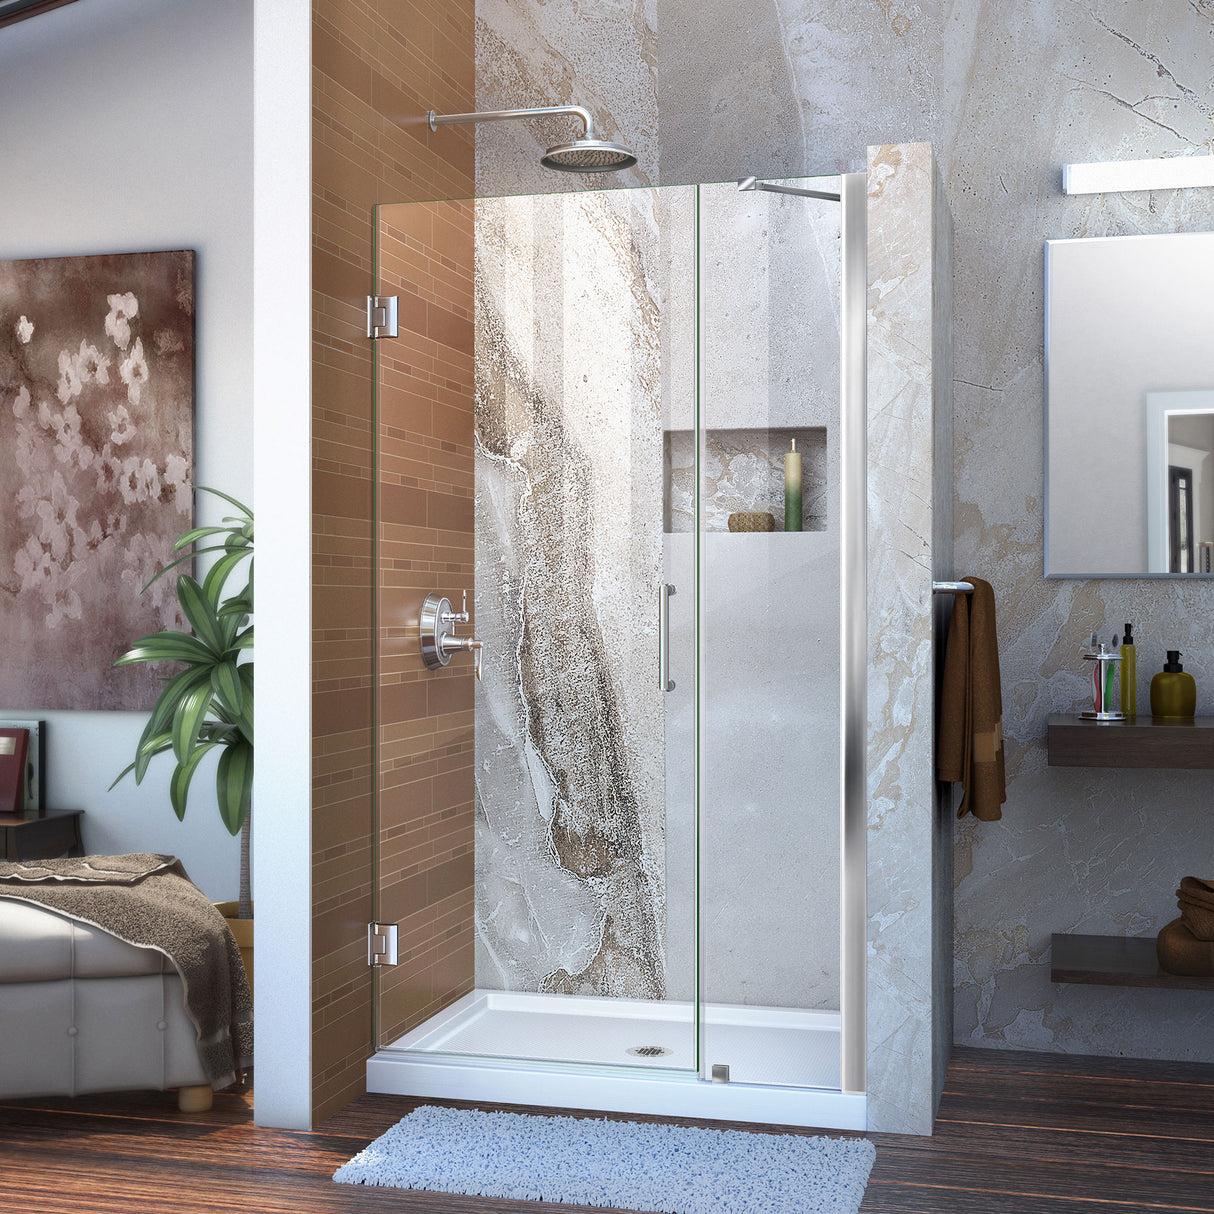 DreamLine Unidoor 38-39 in. W x 72 in. H Frameless Hinged Shower Door with Support Arm in Chrome